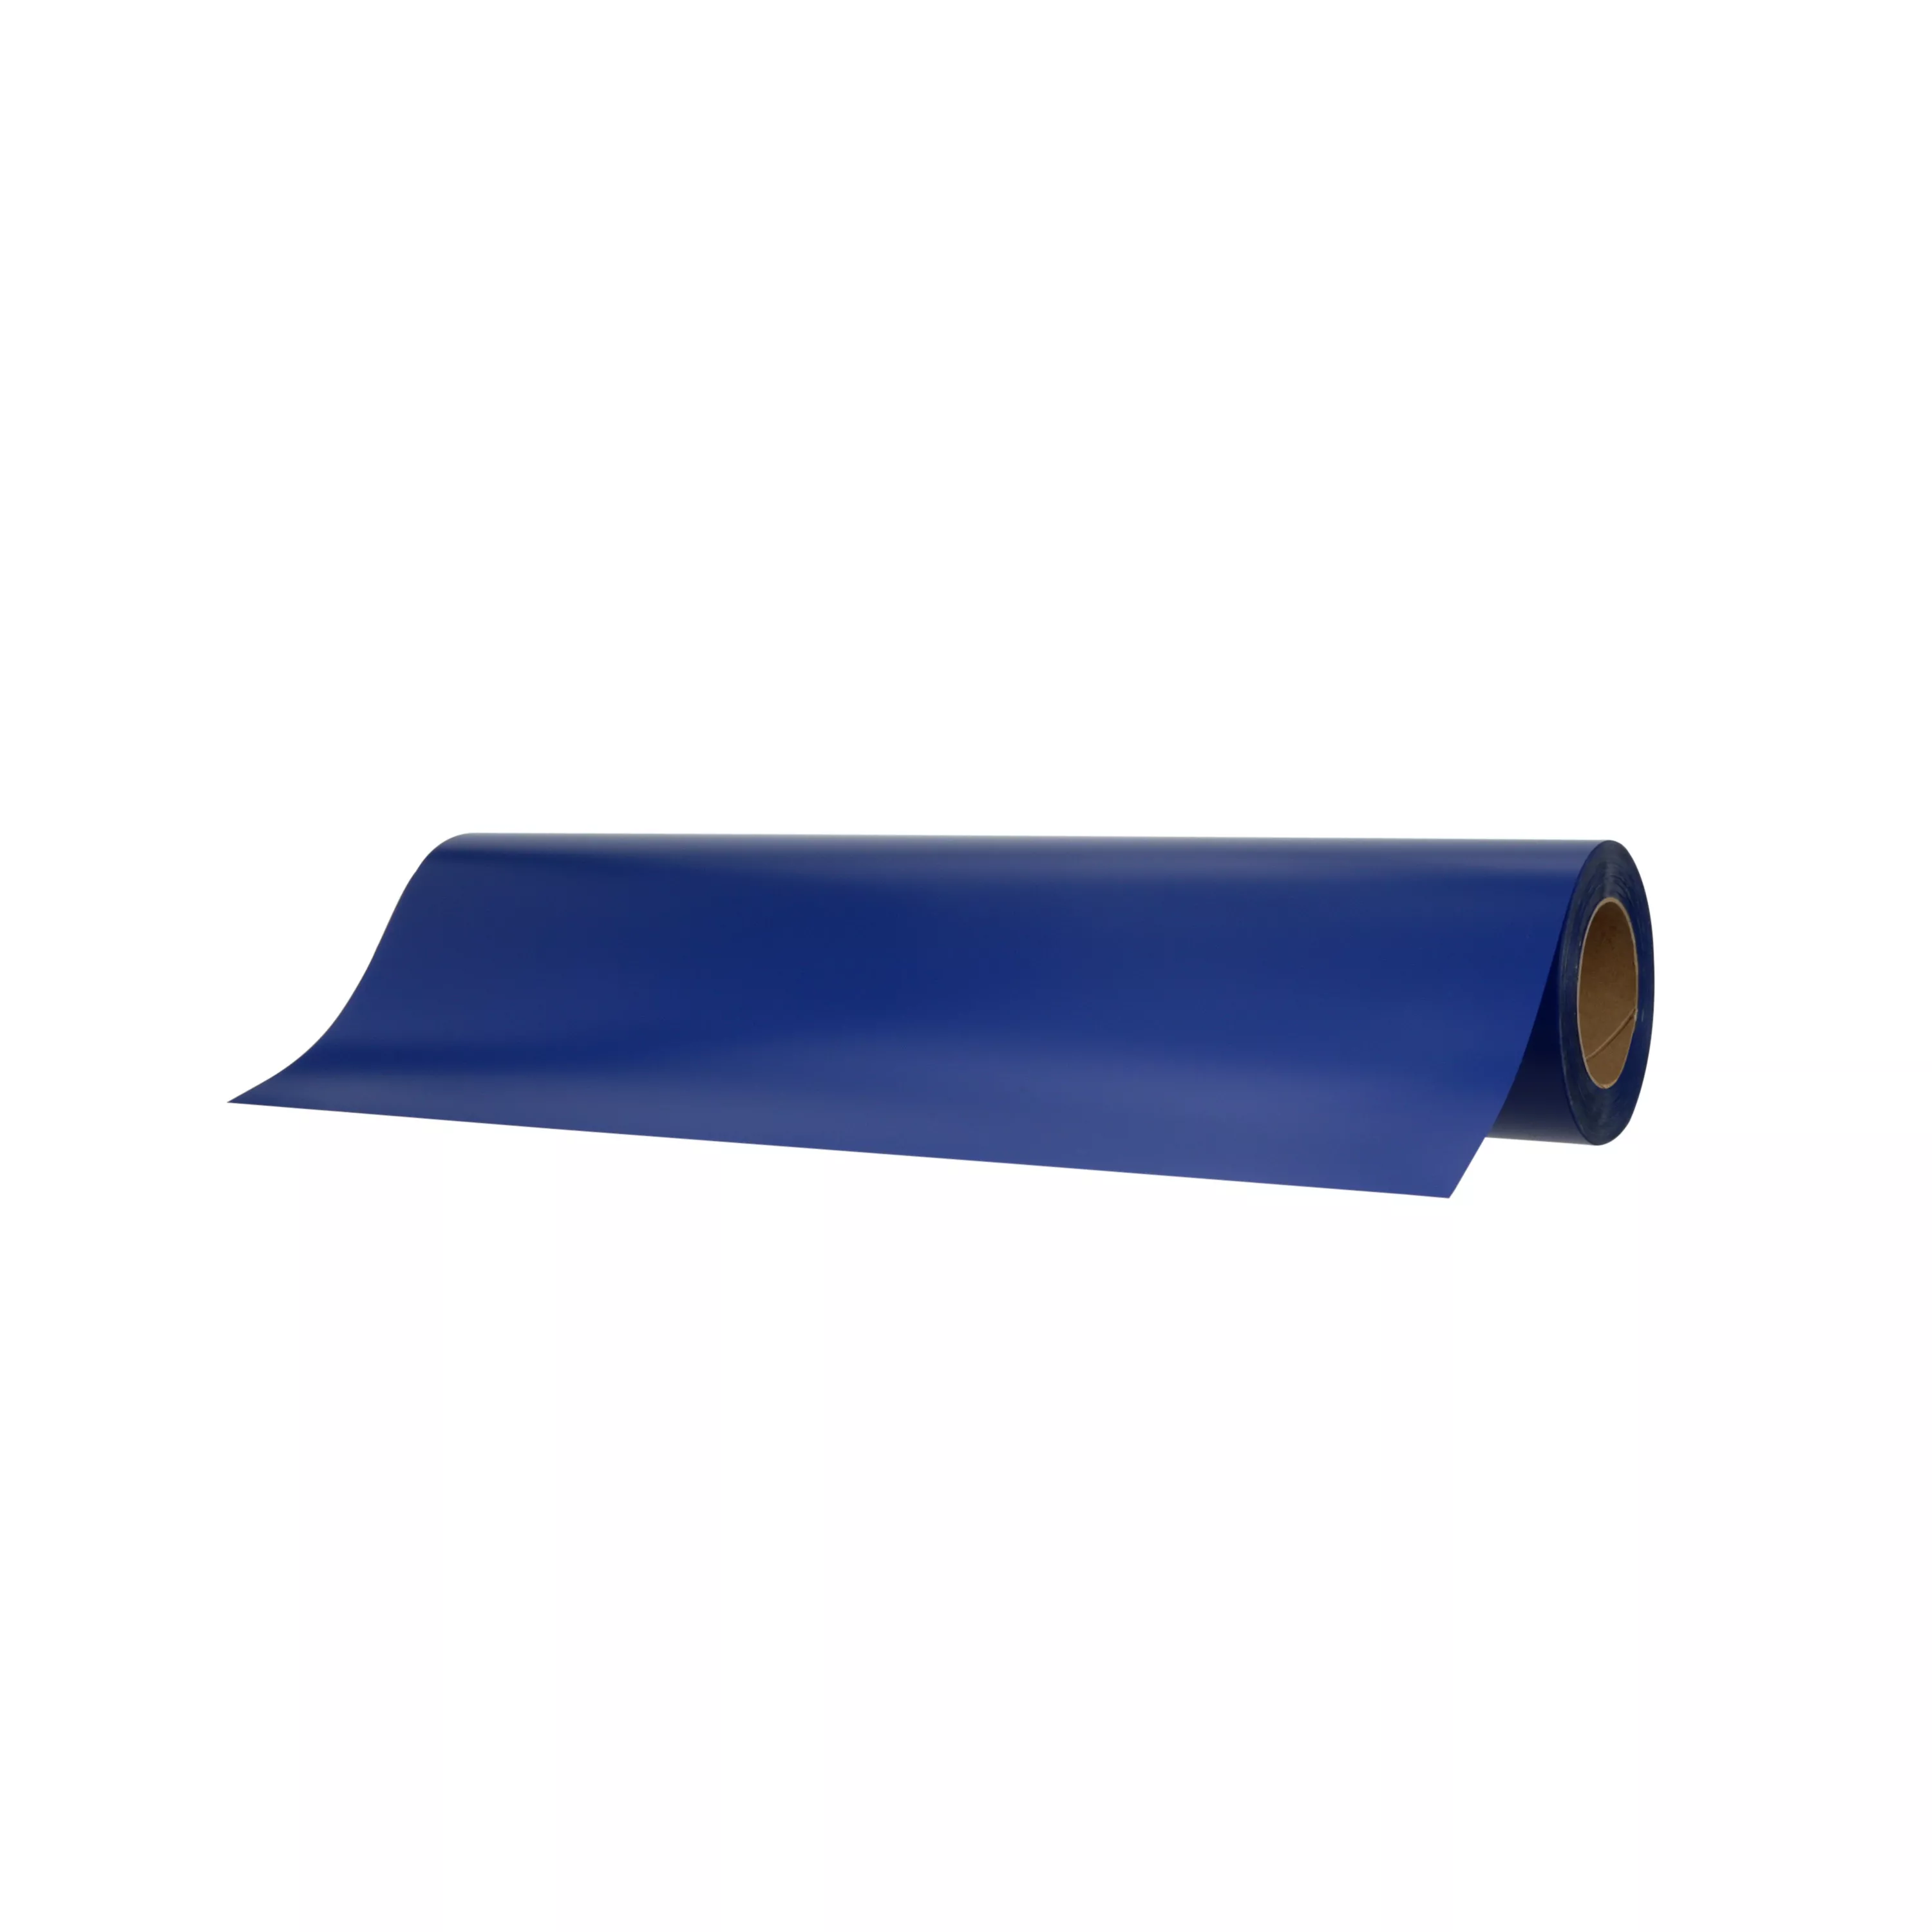 3M™ Scotchcal™ Translucent Graphic Film 3630-187, Infinity Blue, 48 in x
50 yd, 1 Roll/Case